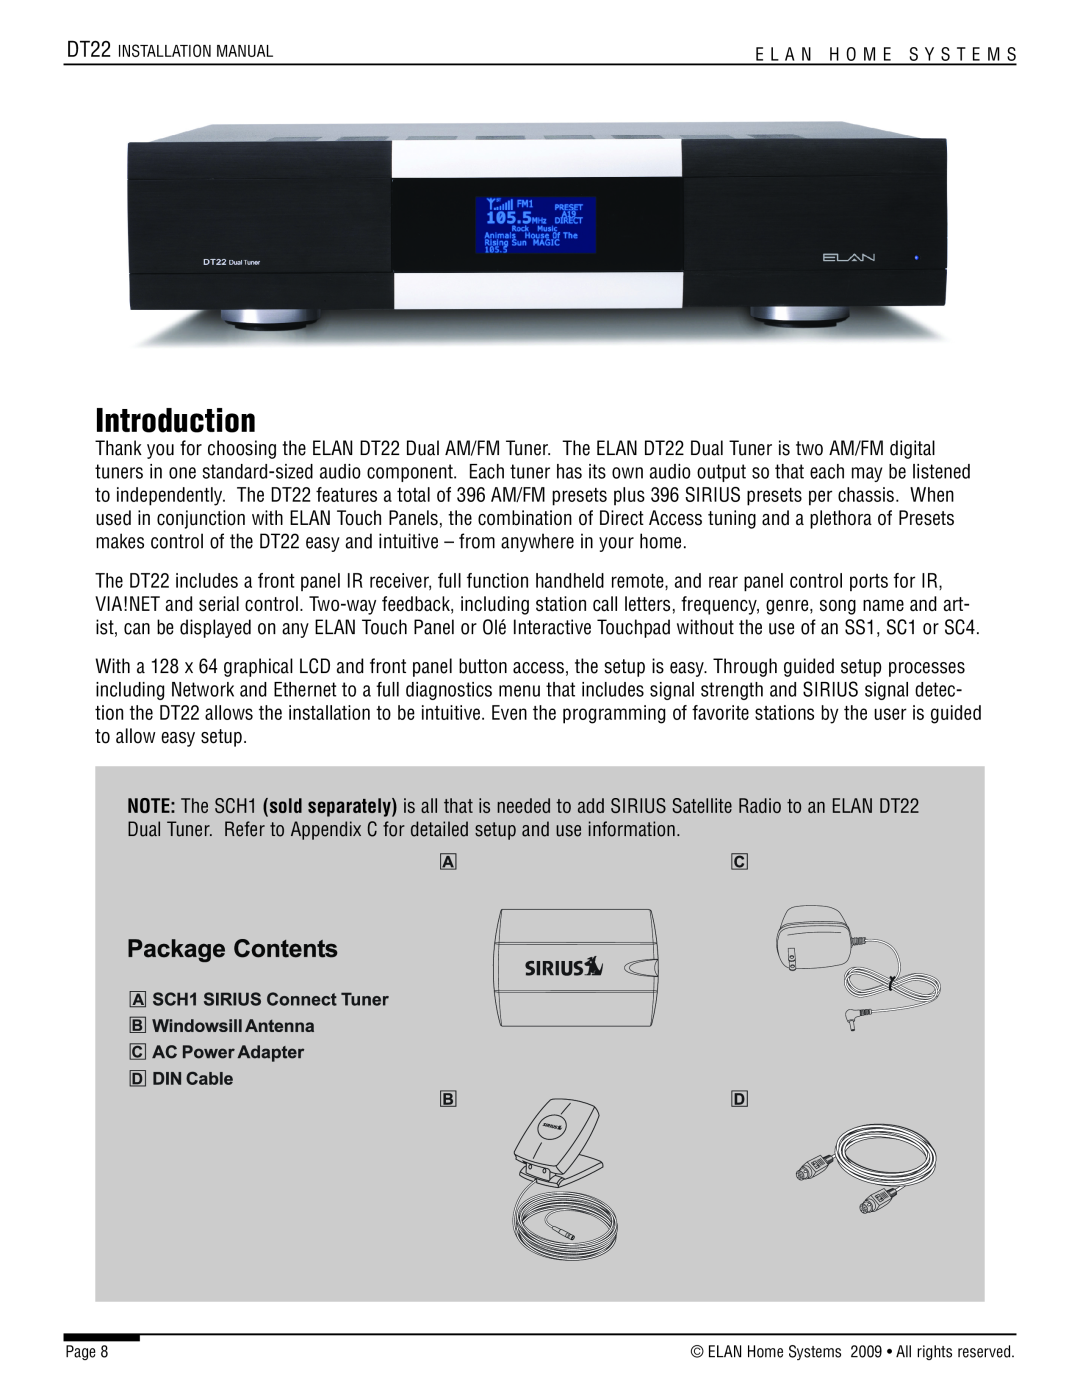 ELAN Home Systems DT22 manual Introduction 